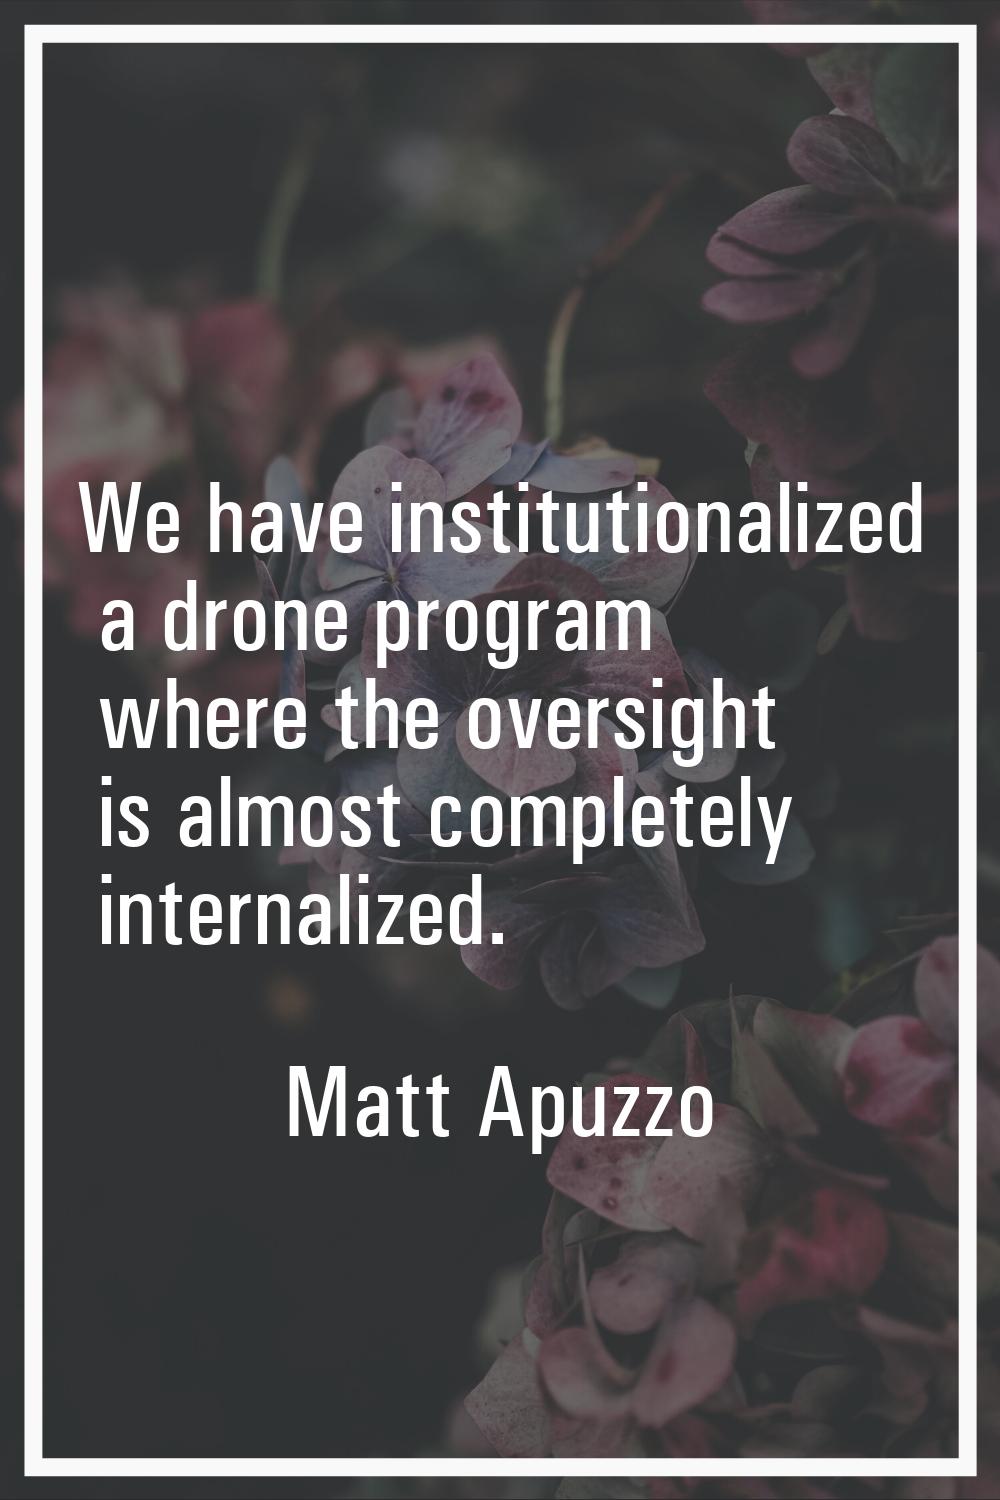 We have institutionalized a drone program where the oversight is almost completely internalized.